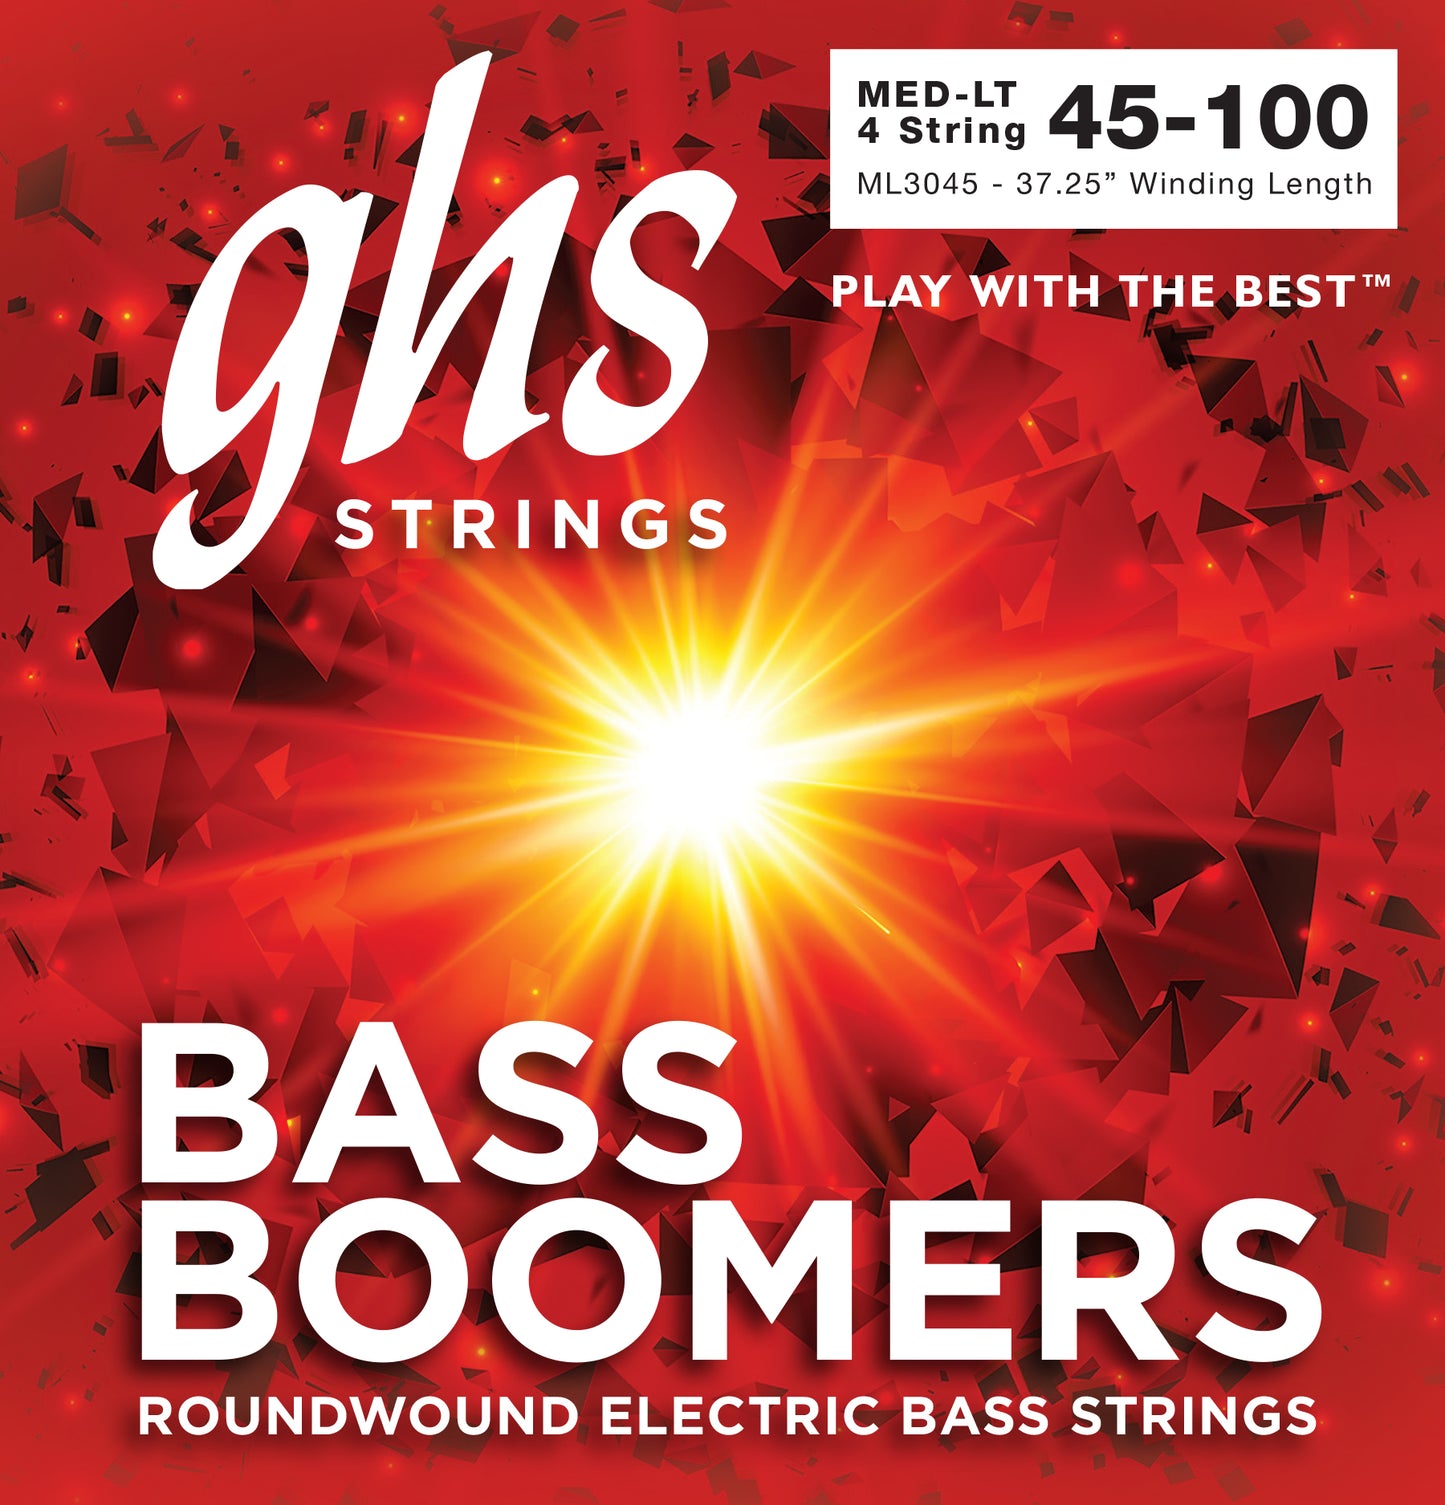 GHS Strings GHS Bass Boomers Nickel Wound Bass String Set Long Scale - 4-String 45-100 Medium-Light ML3045